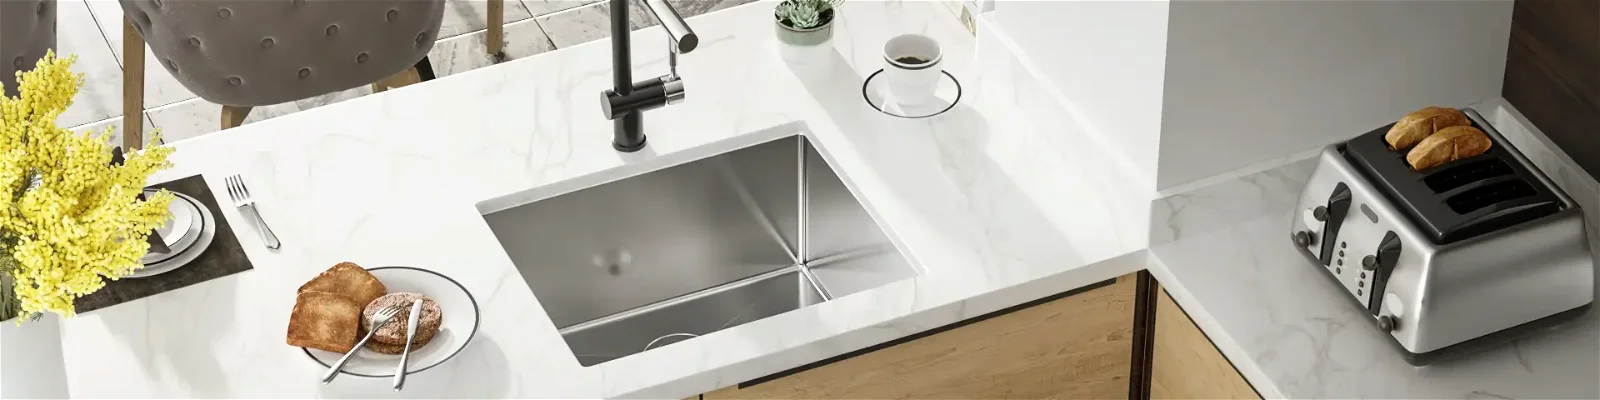 RV & tiny home-stainless-steel-sinks